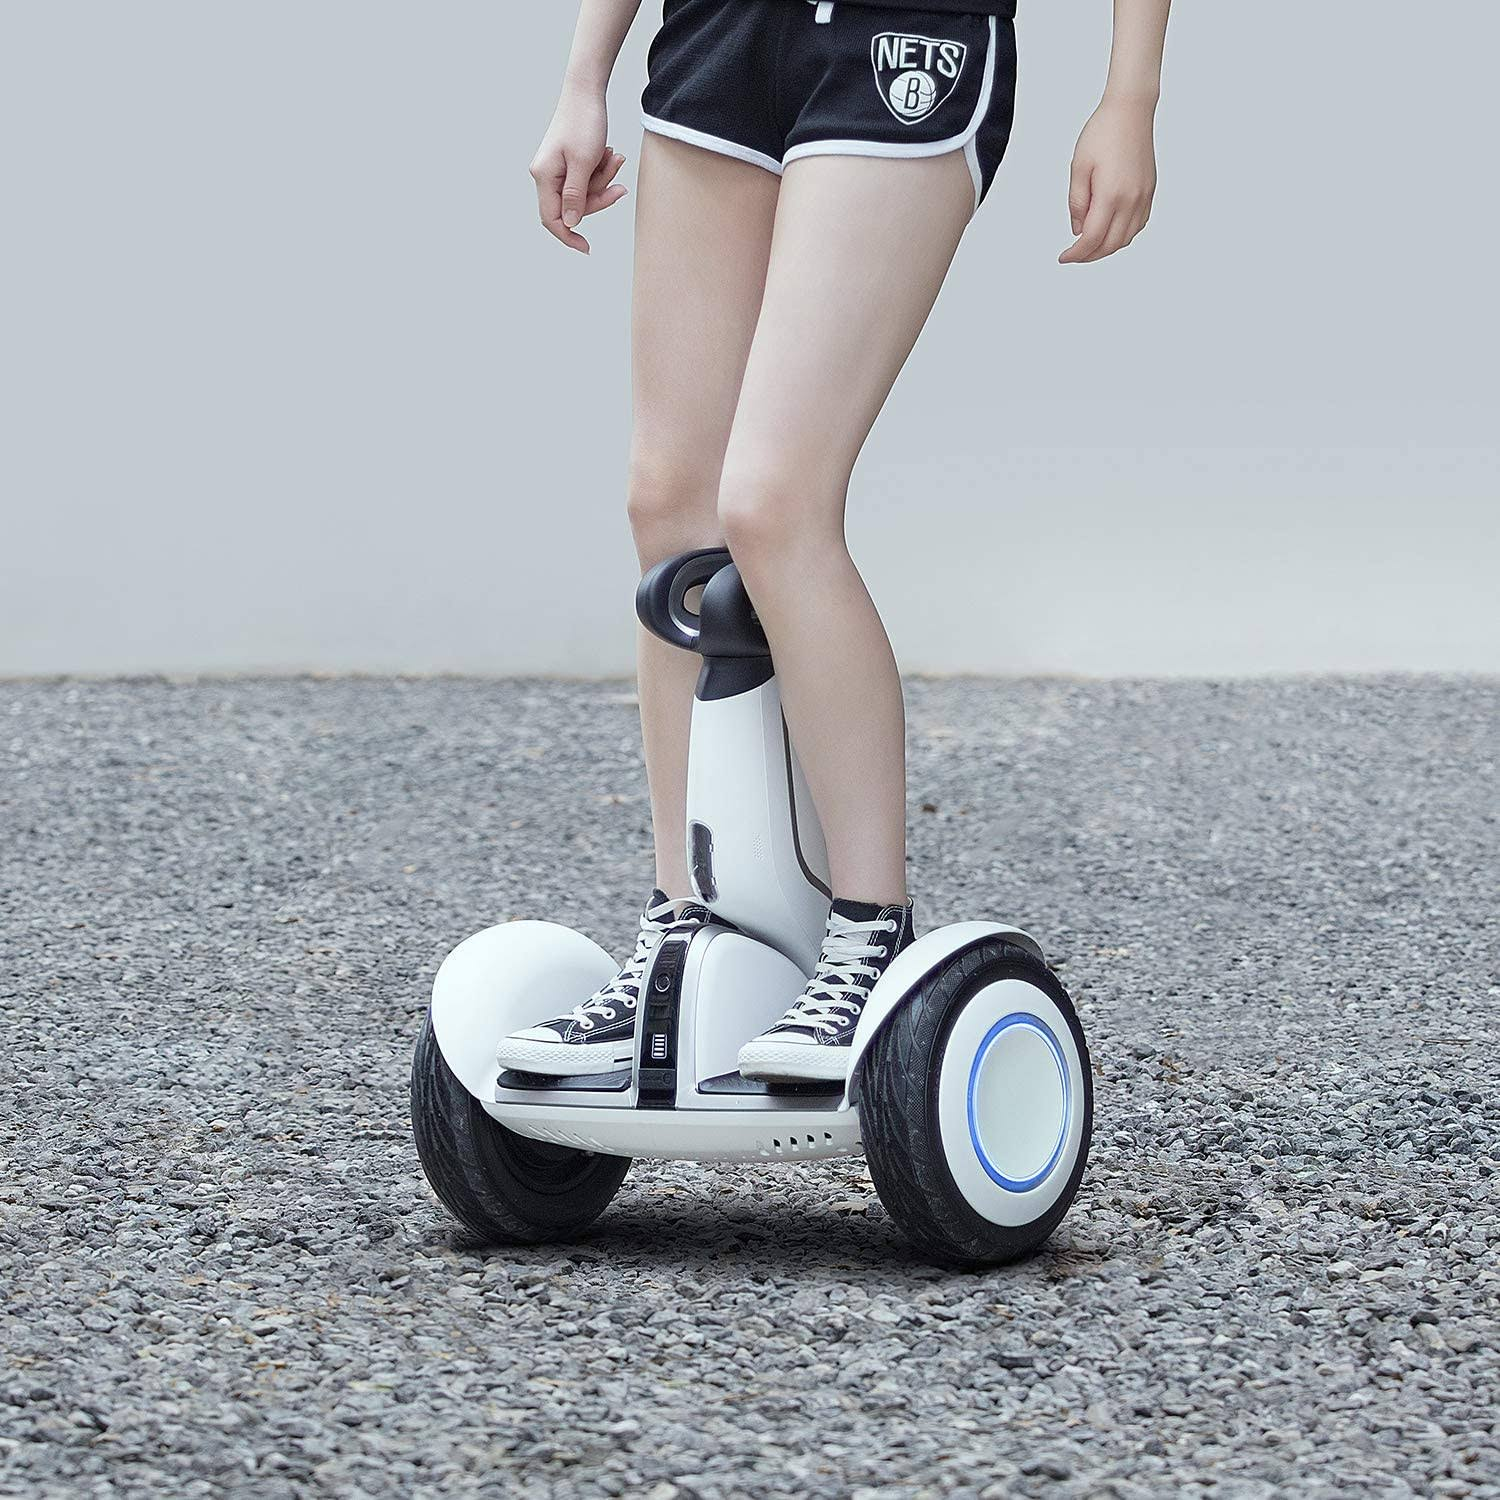 Ninebot S-Plus Smart Self-Balancing Electric Scooter with Intelligent Lighting and Battery System, Remote Control and Auto-Following Mode, White